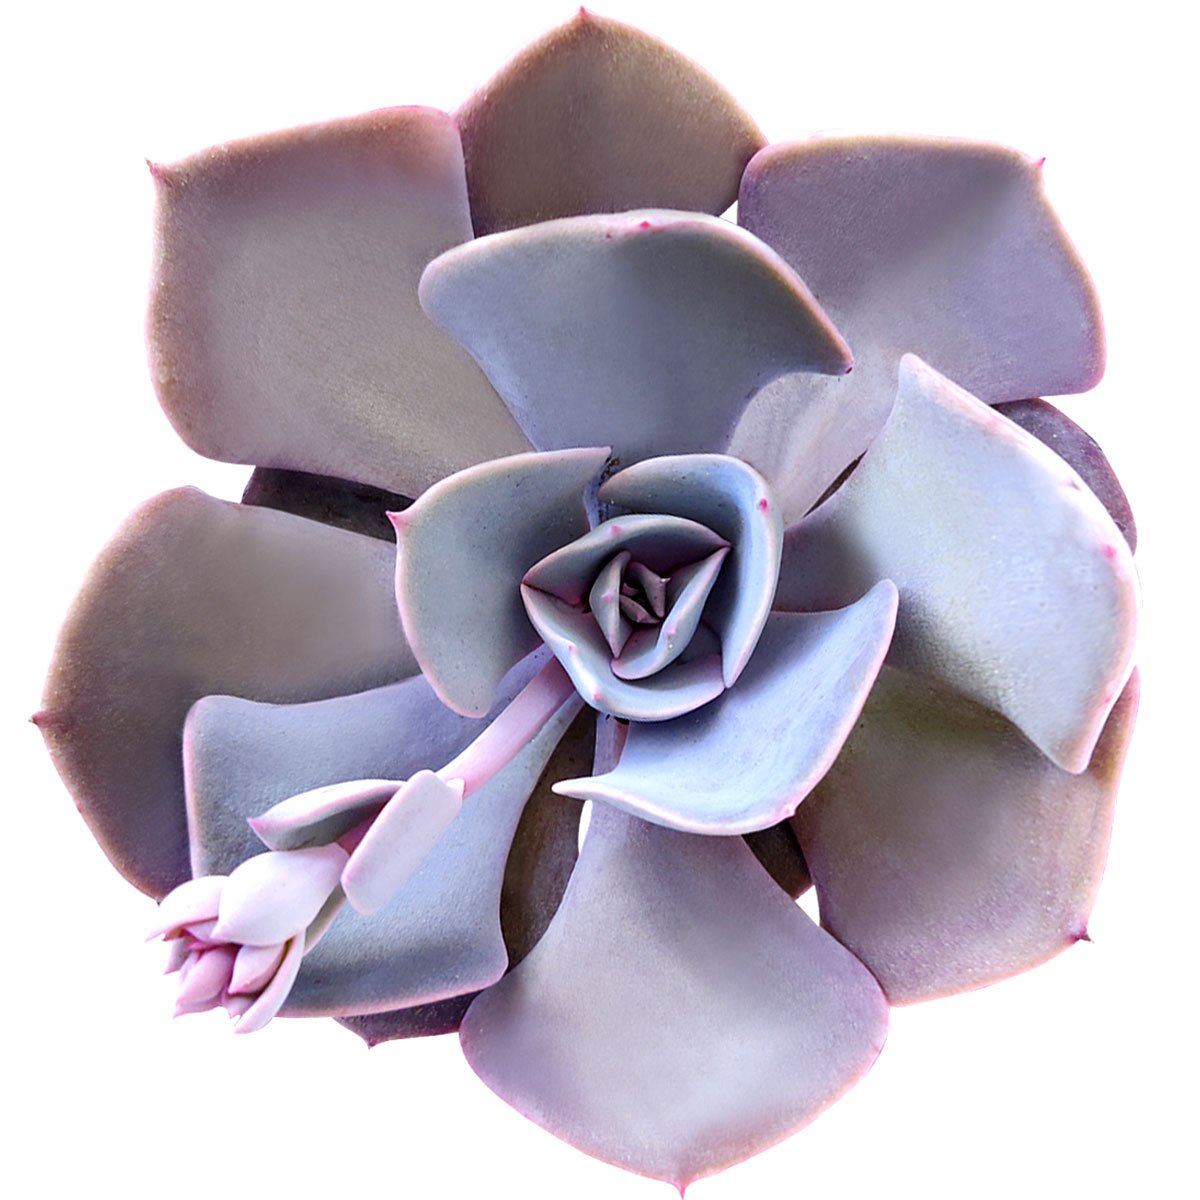 2 inch Succulent Randomly Picked, Types of succulents for sale, Colorful Succulents Collection